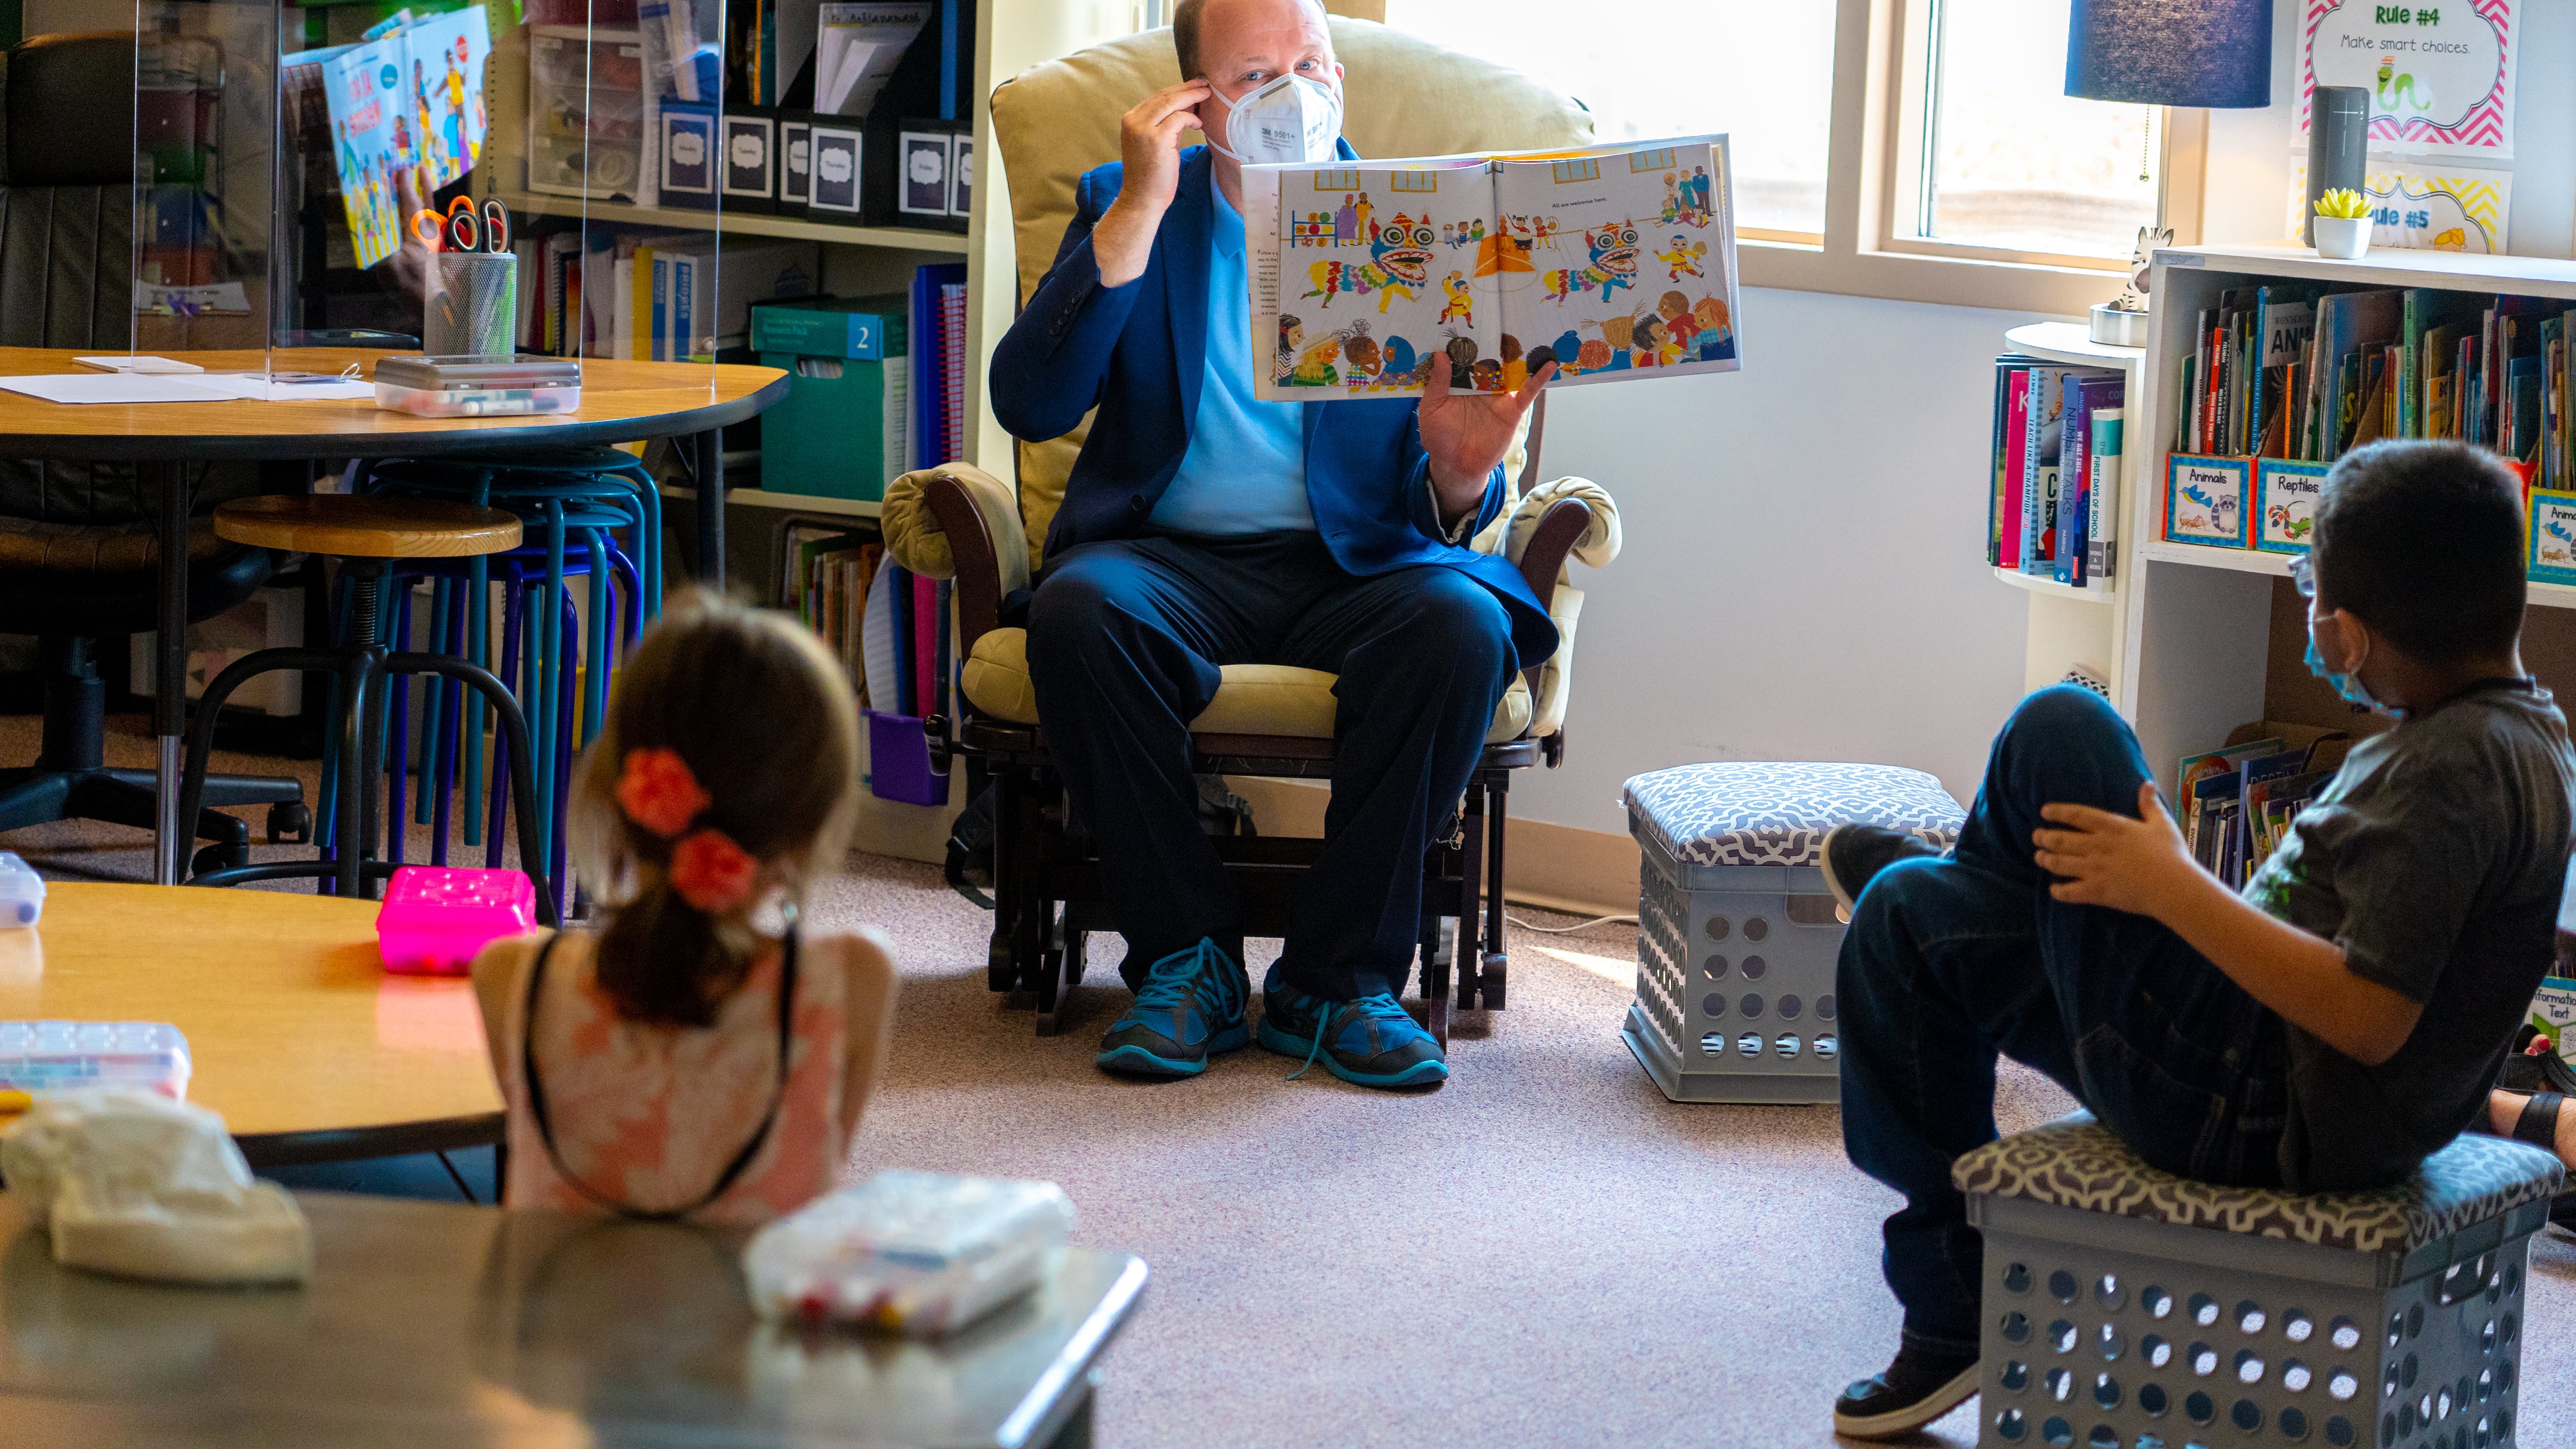 Colorado Gov. Jared Polis reads a story to young schoolchildren in a classroom while wearing a mask during the COVID-19 pandemic.